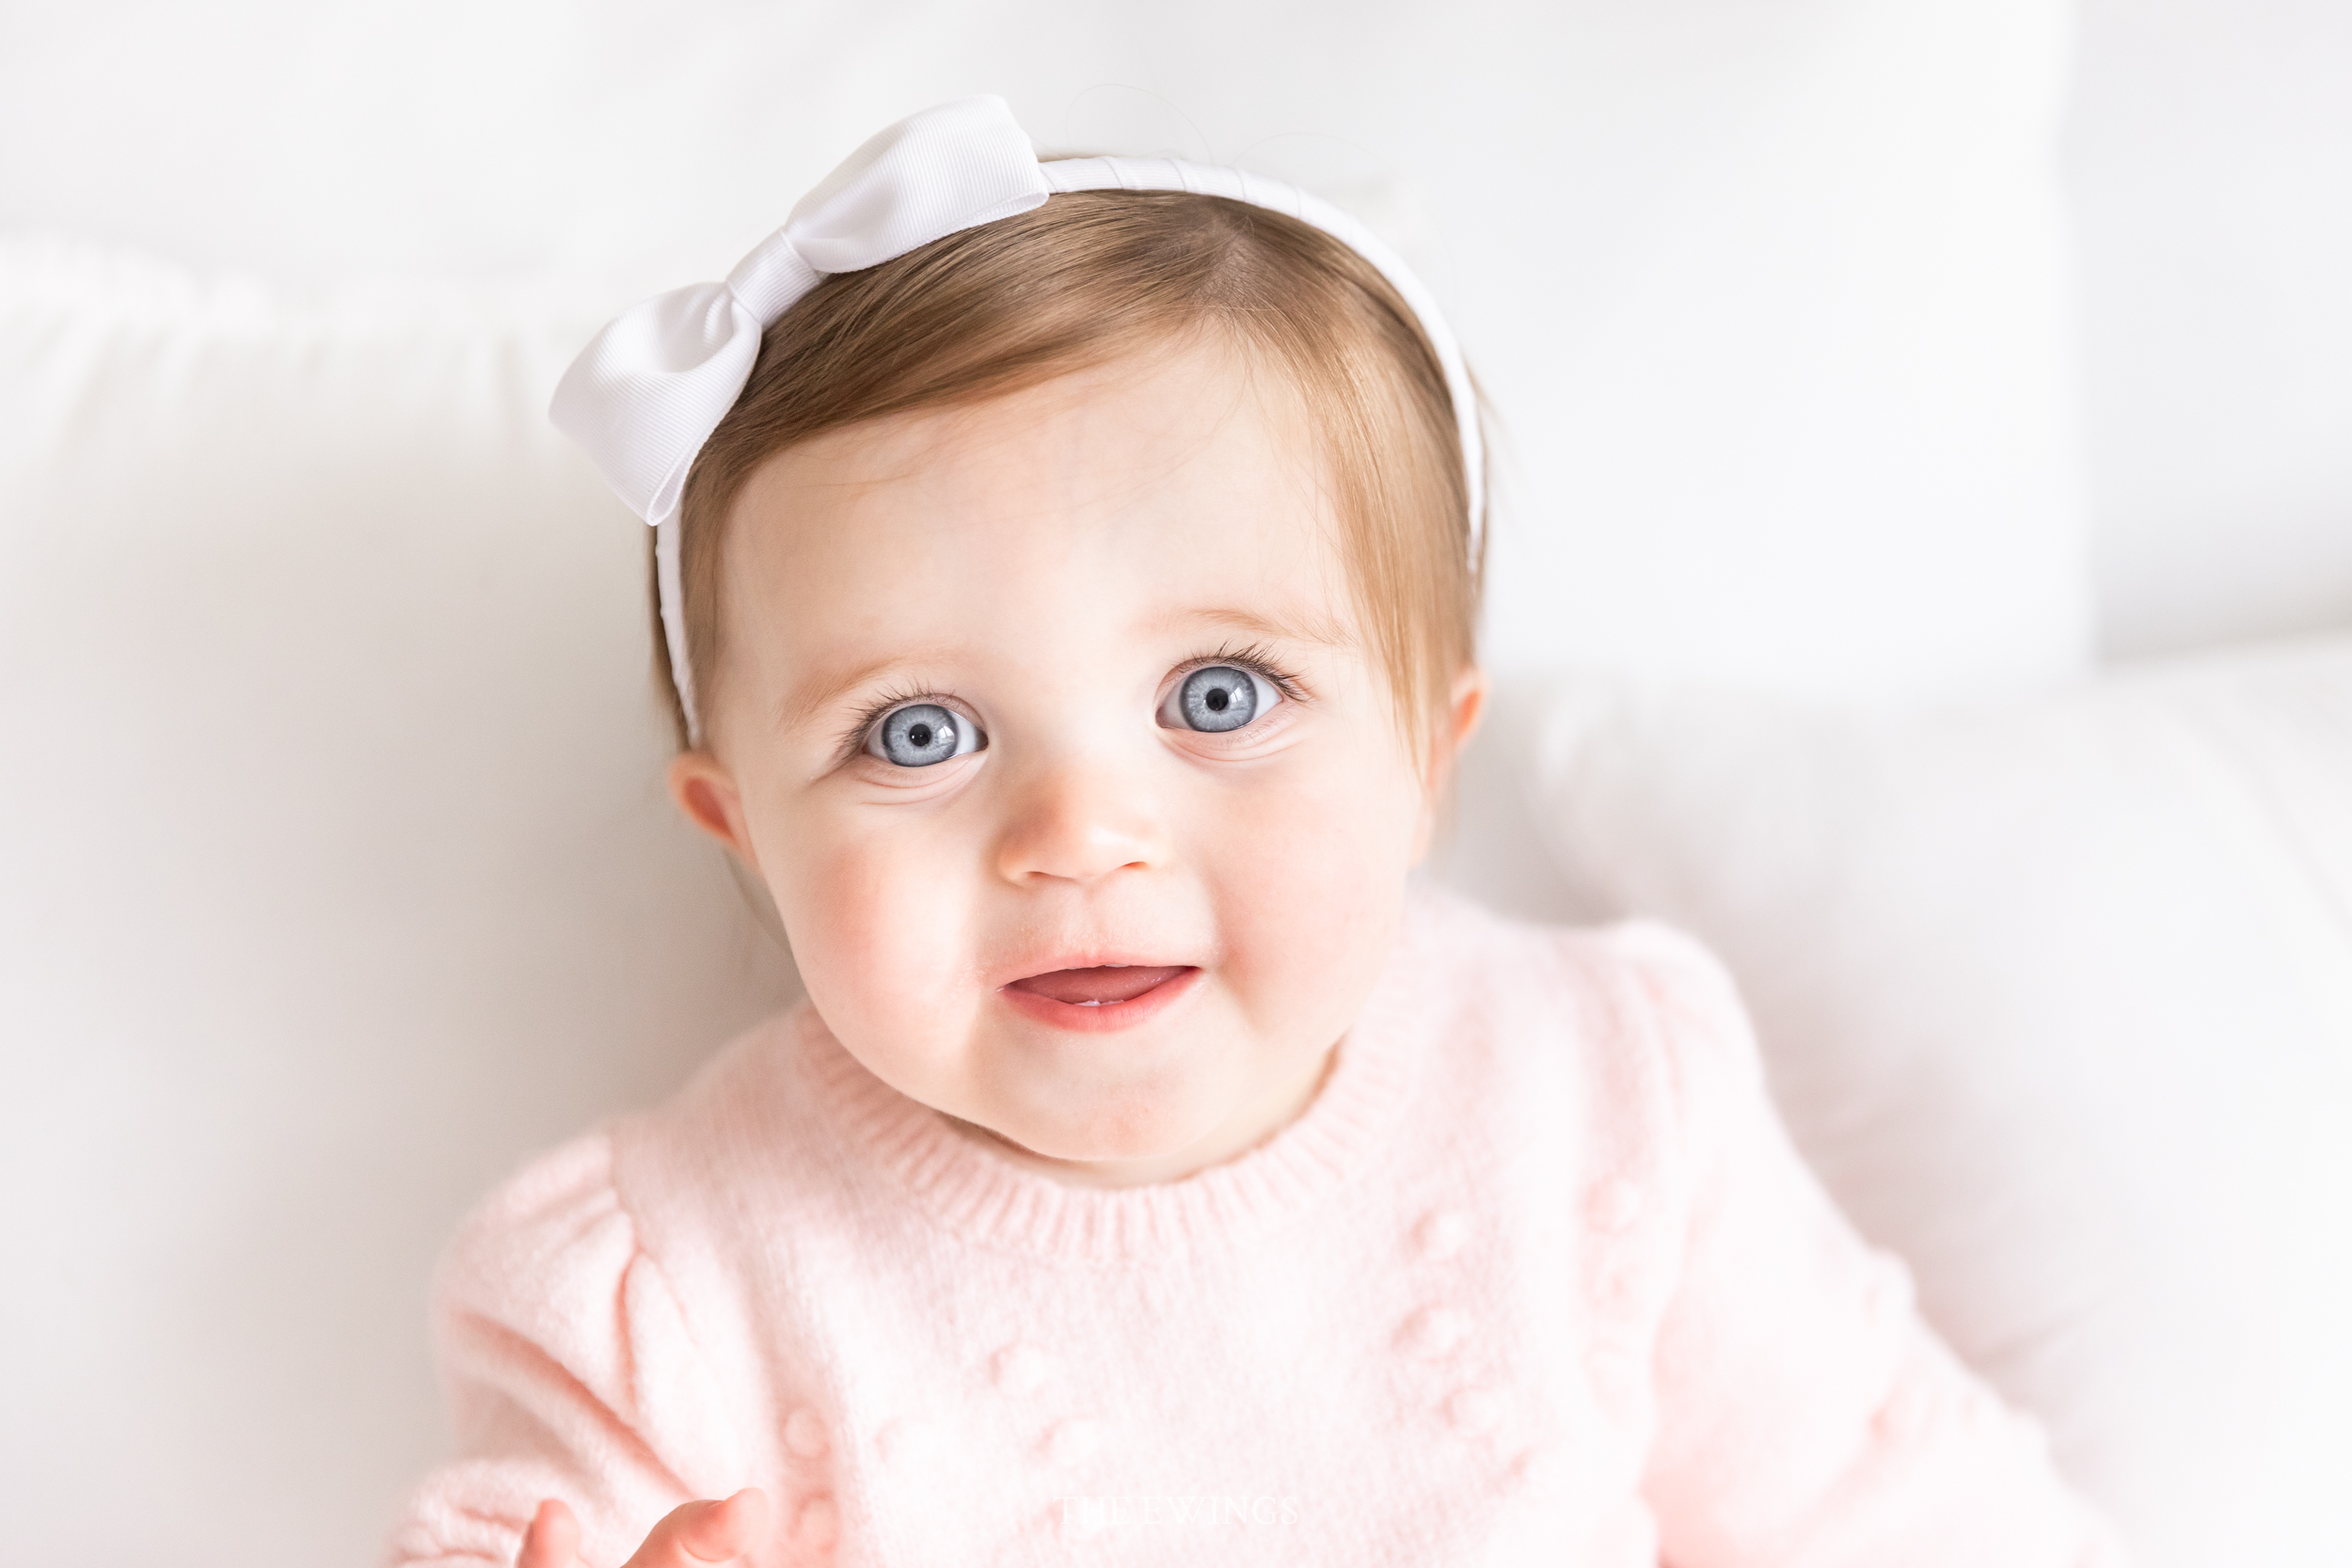 A photography portrait gift certificate is perfect for grandparents who are tough to shop for!